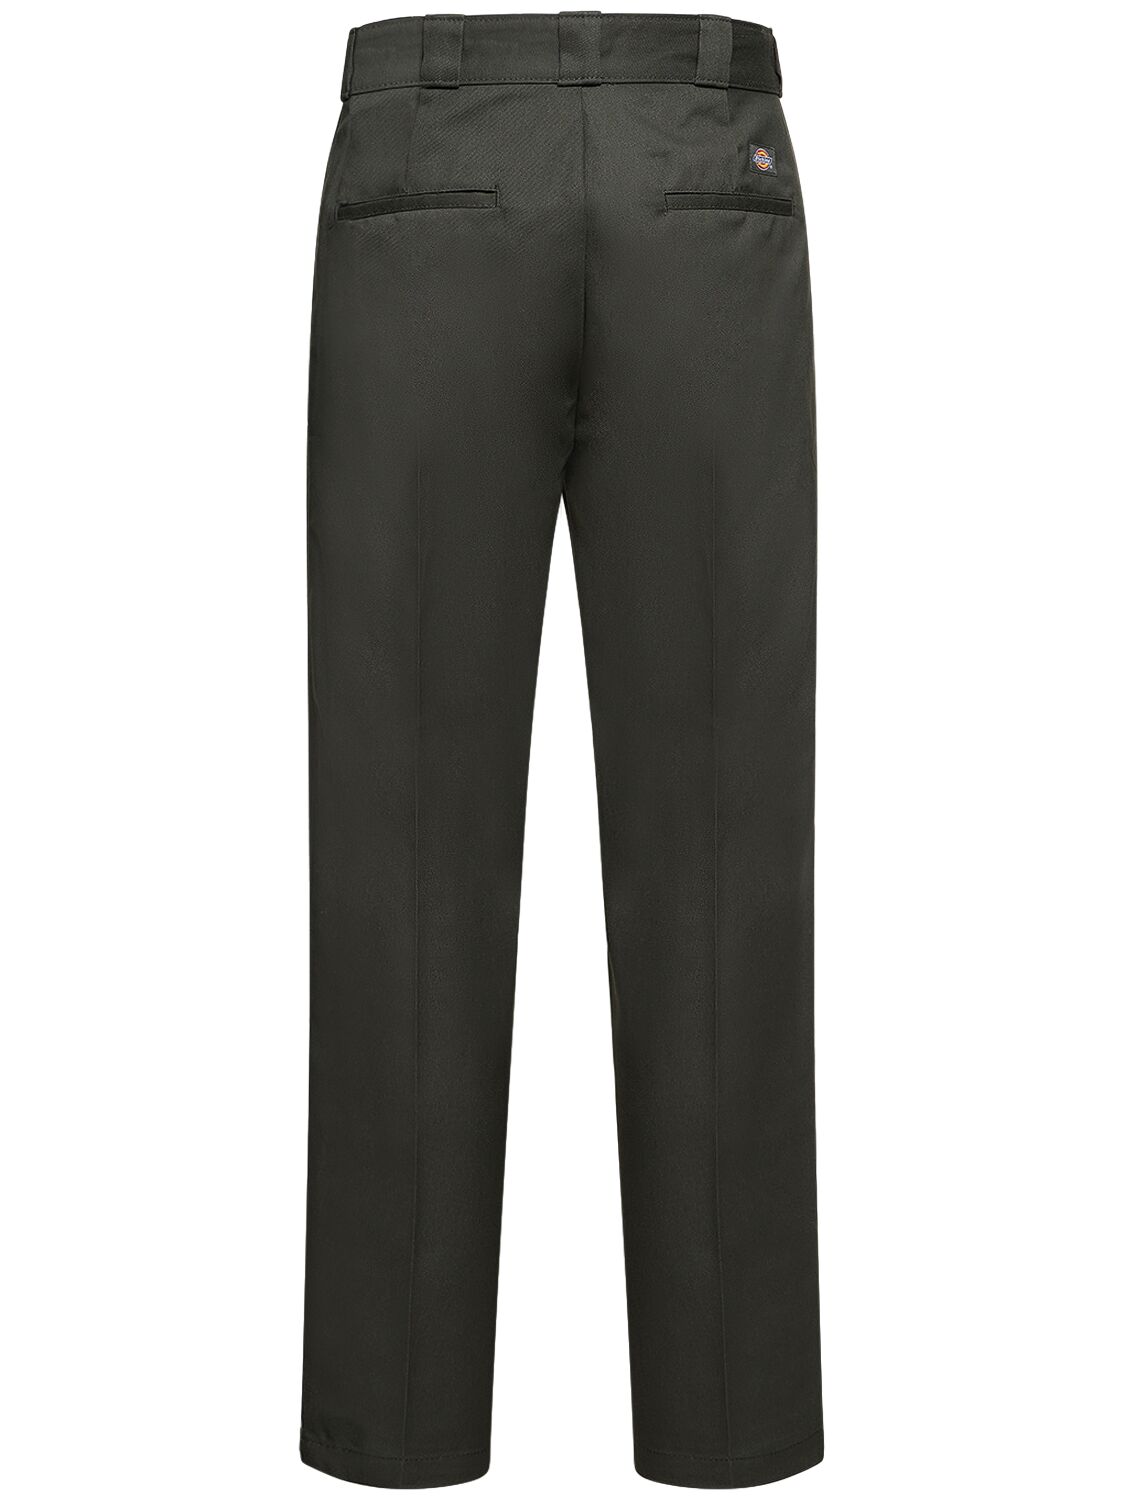 Shop Dickies 874 Straight Leg Twill Work Pants In Olive Green